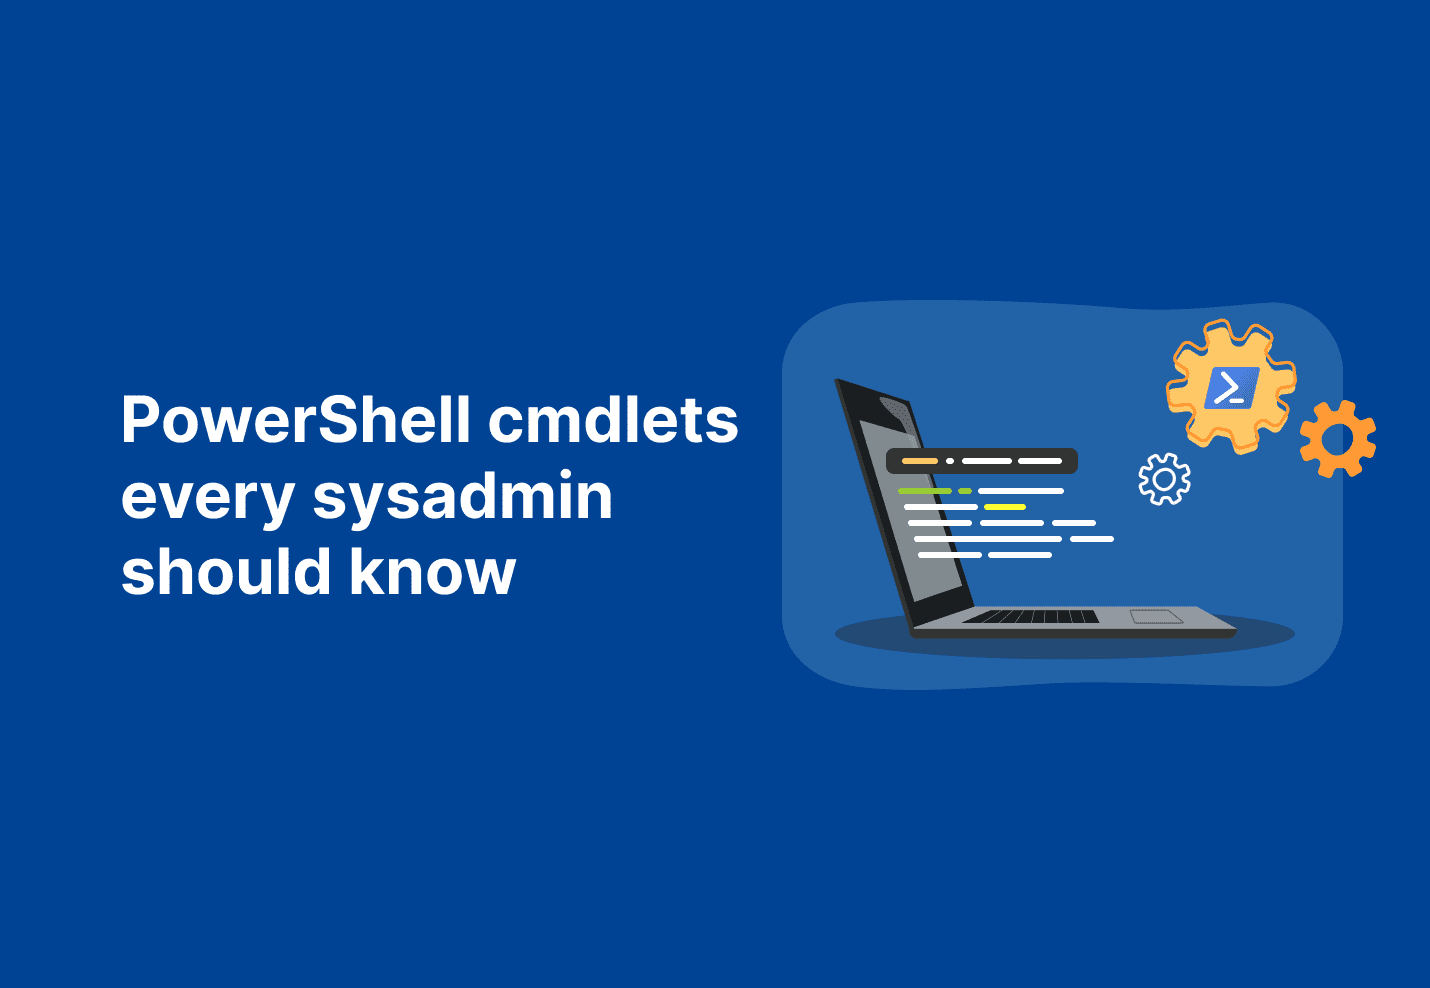 Top 10 PowerShell commands you should know featured image